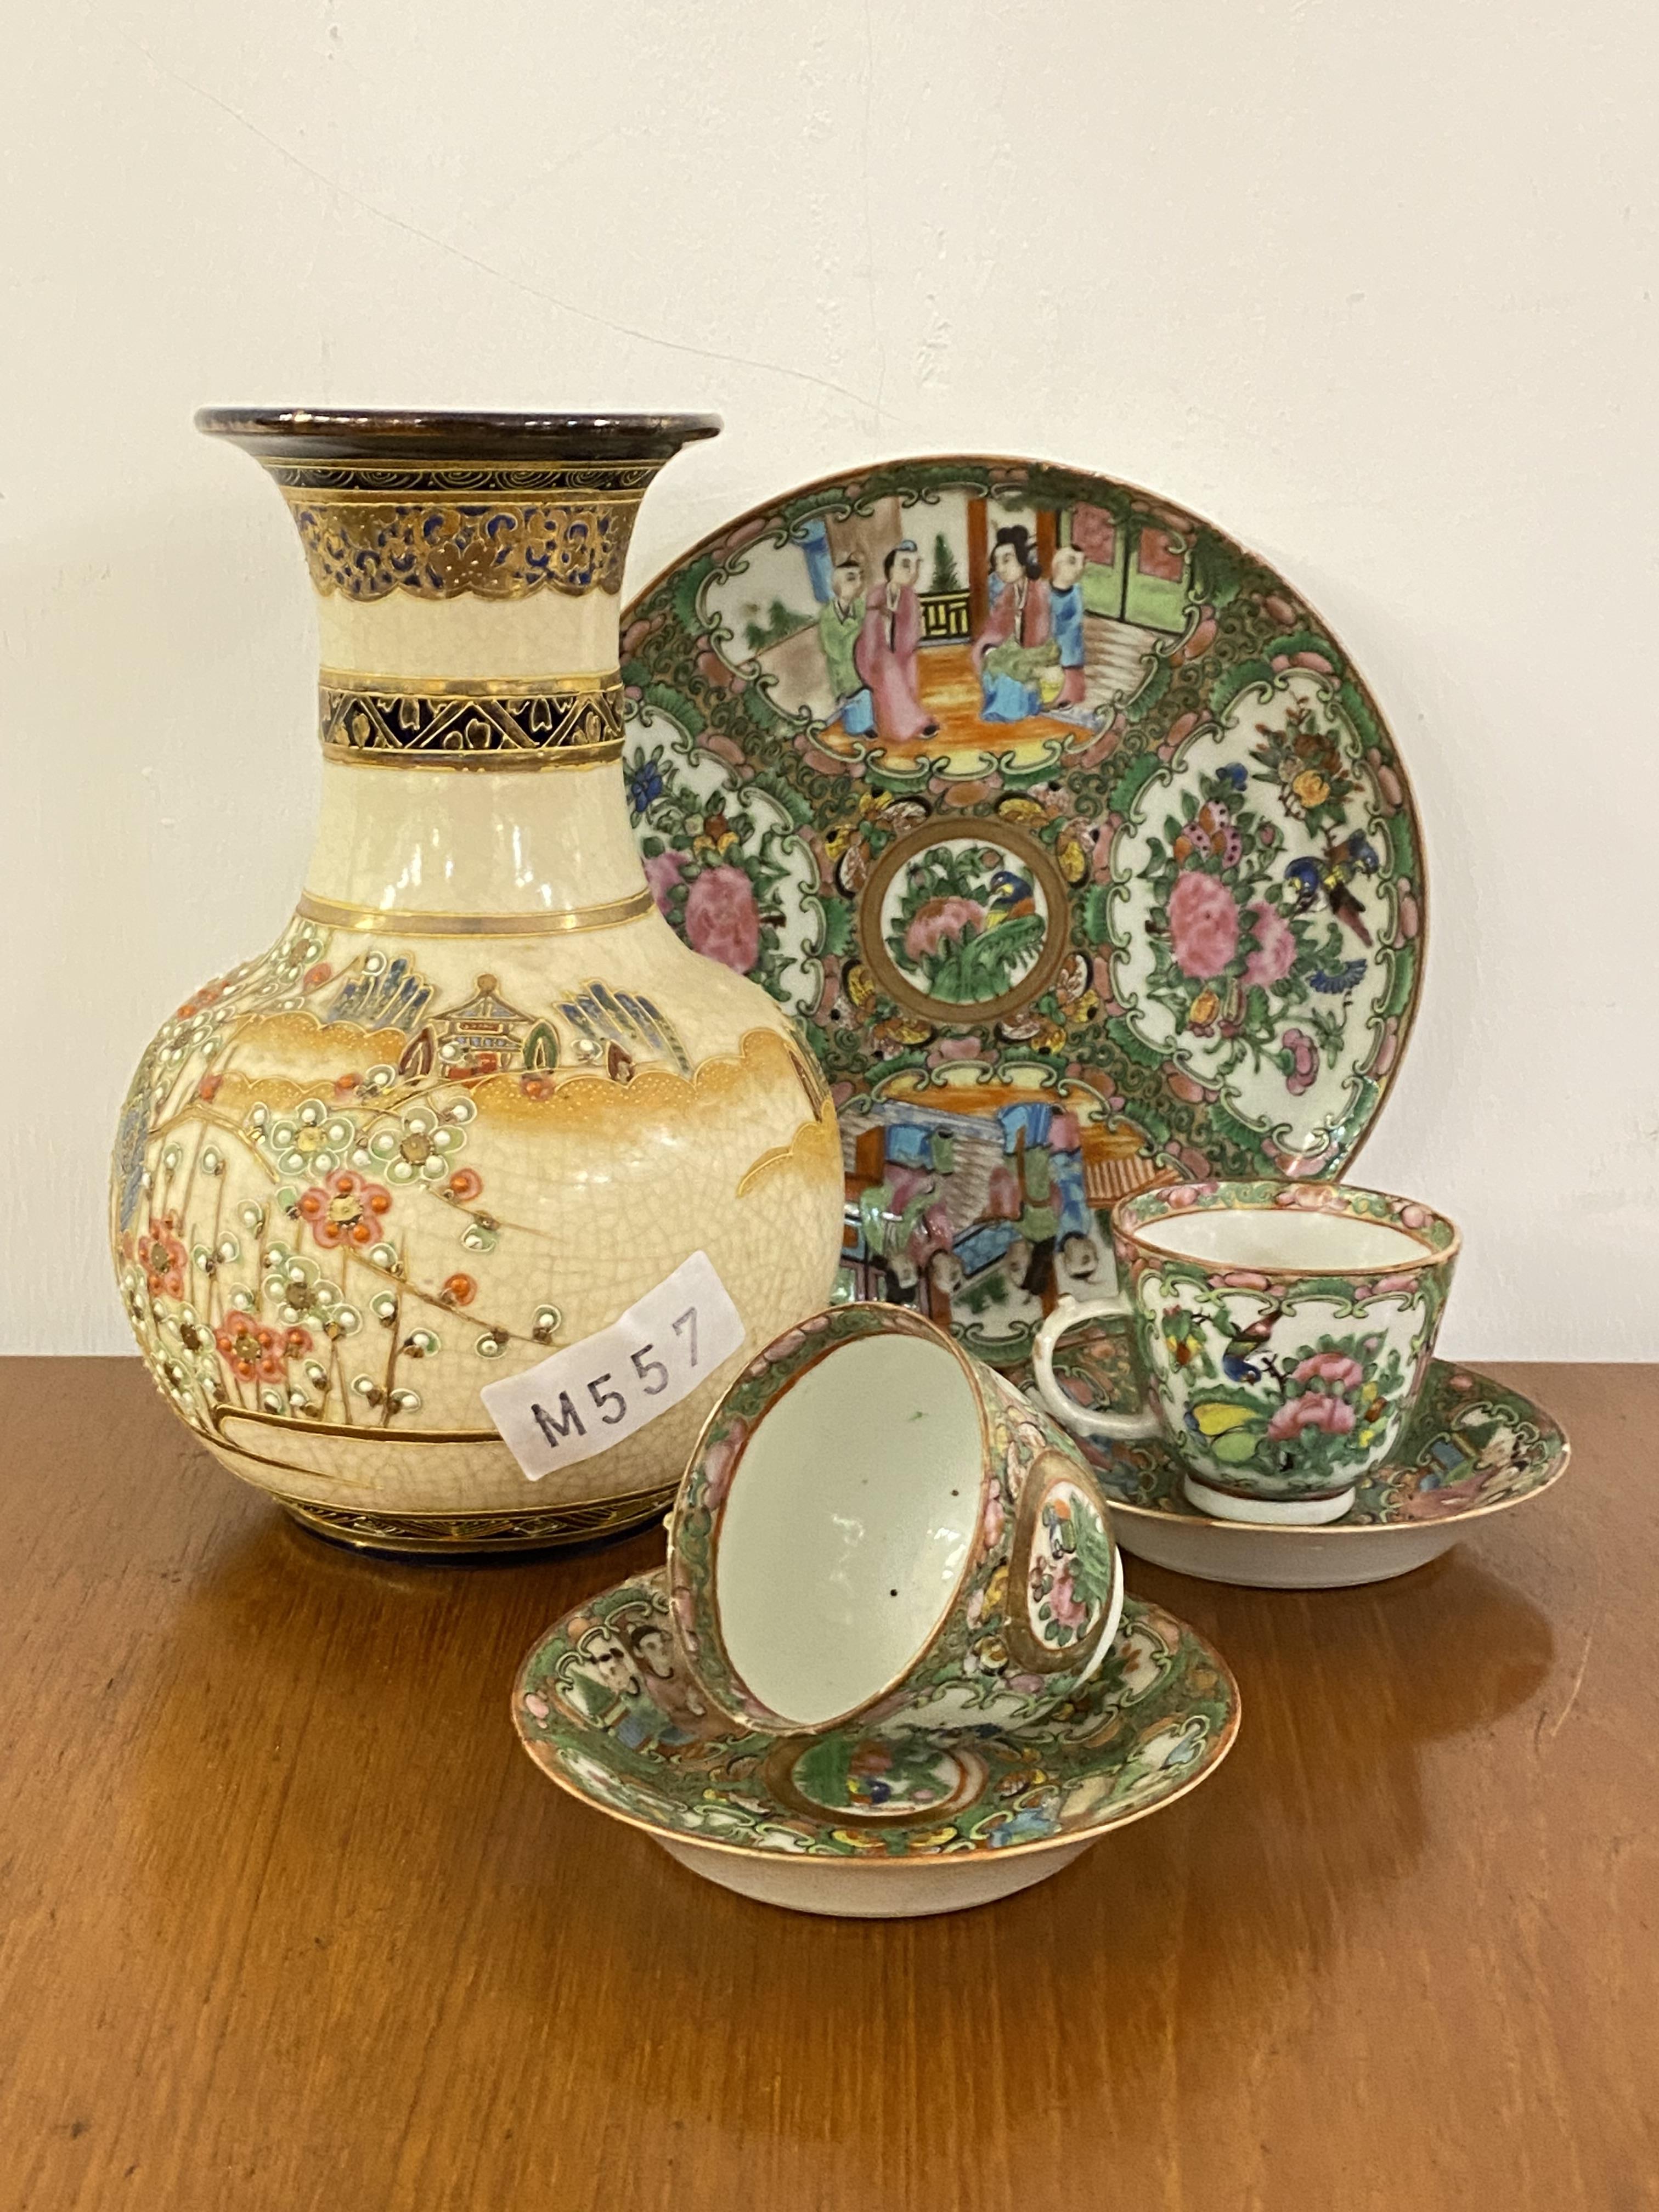 A pair of 19th century Canton Famille Rose teacups and saucers, and a serving plate, together with a